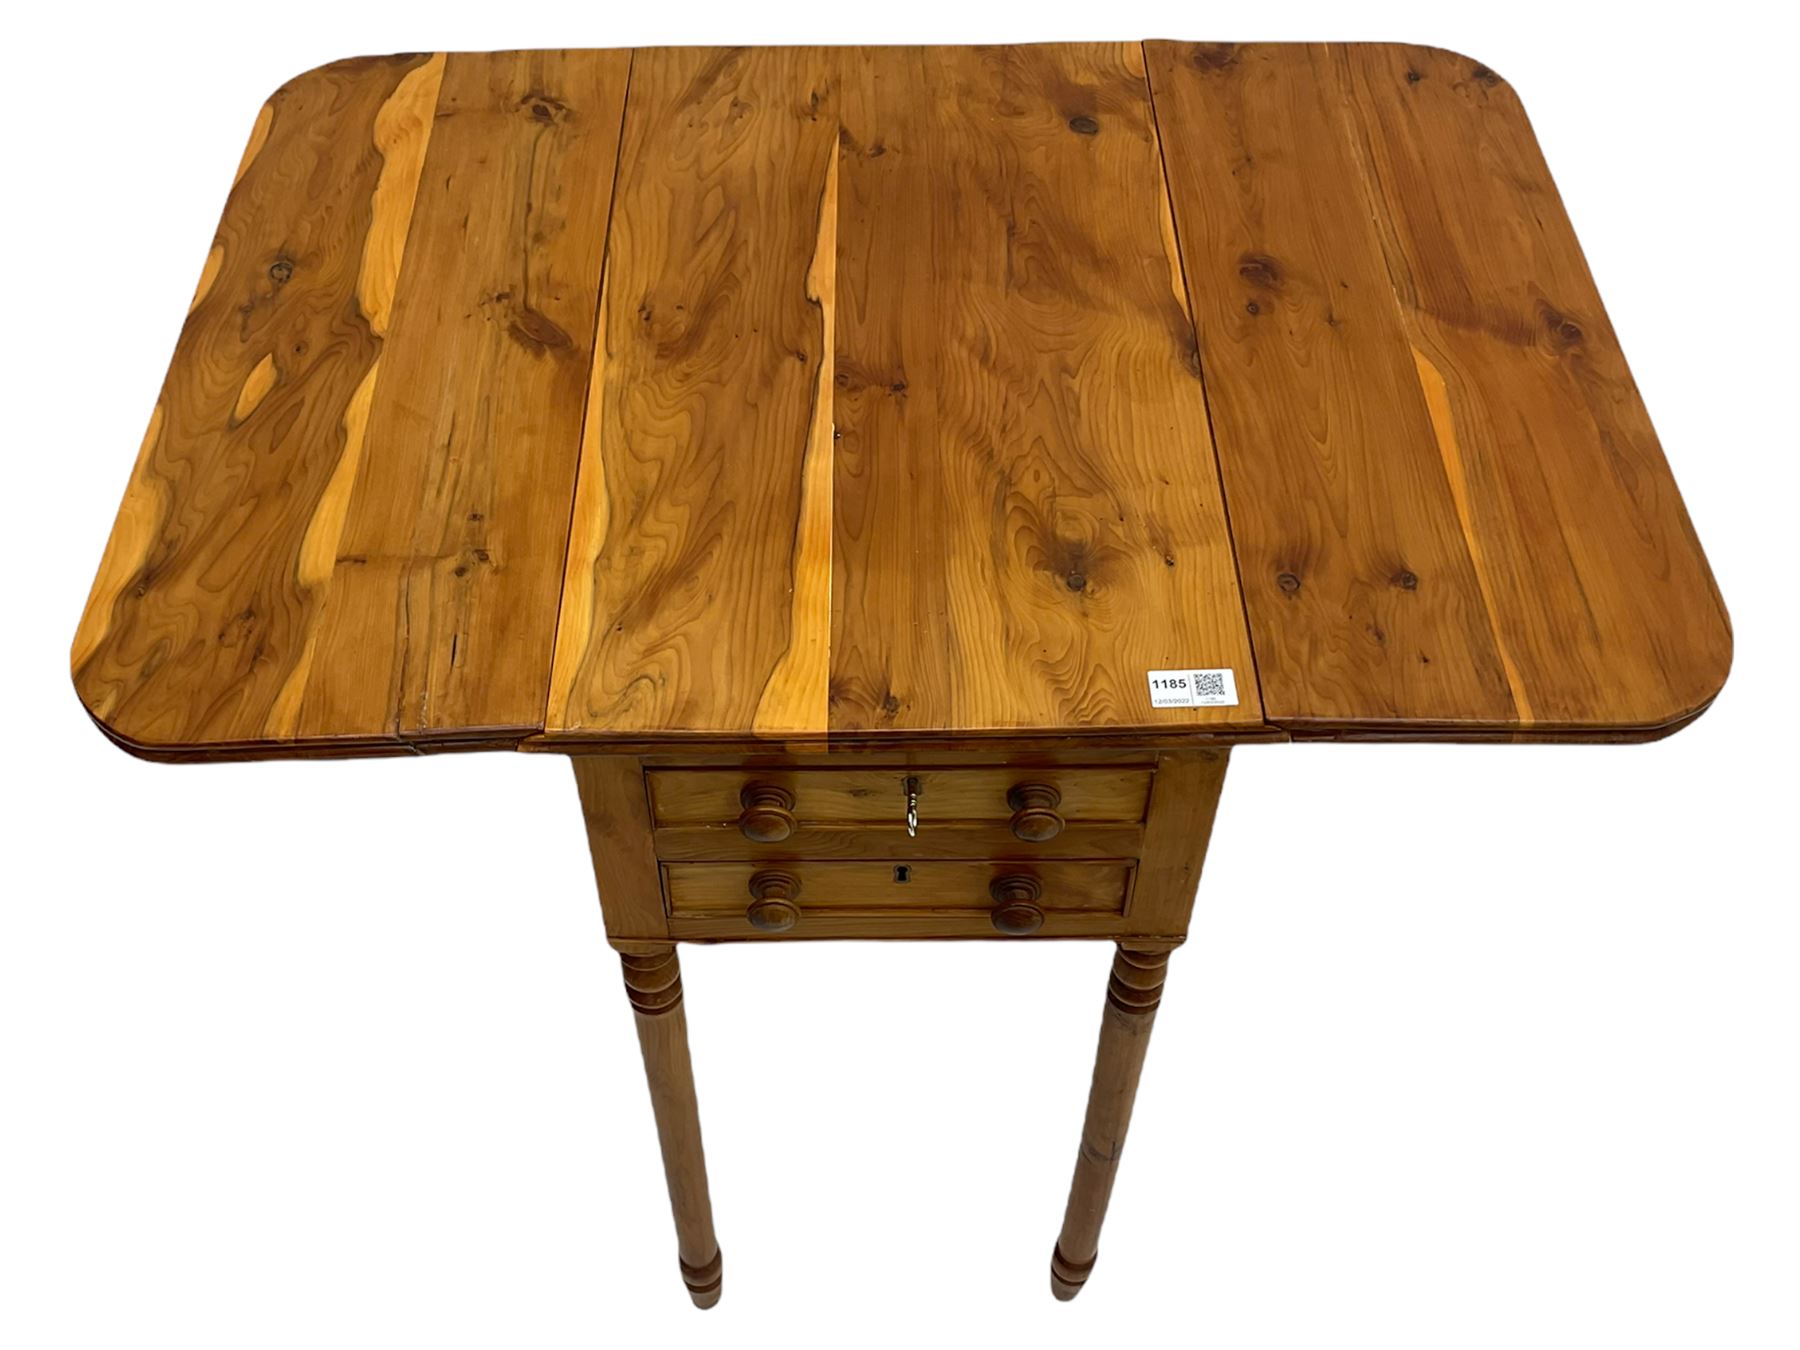 Yew wood drop leaf occasional table - Image 9 of 10